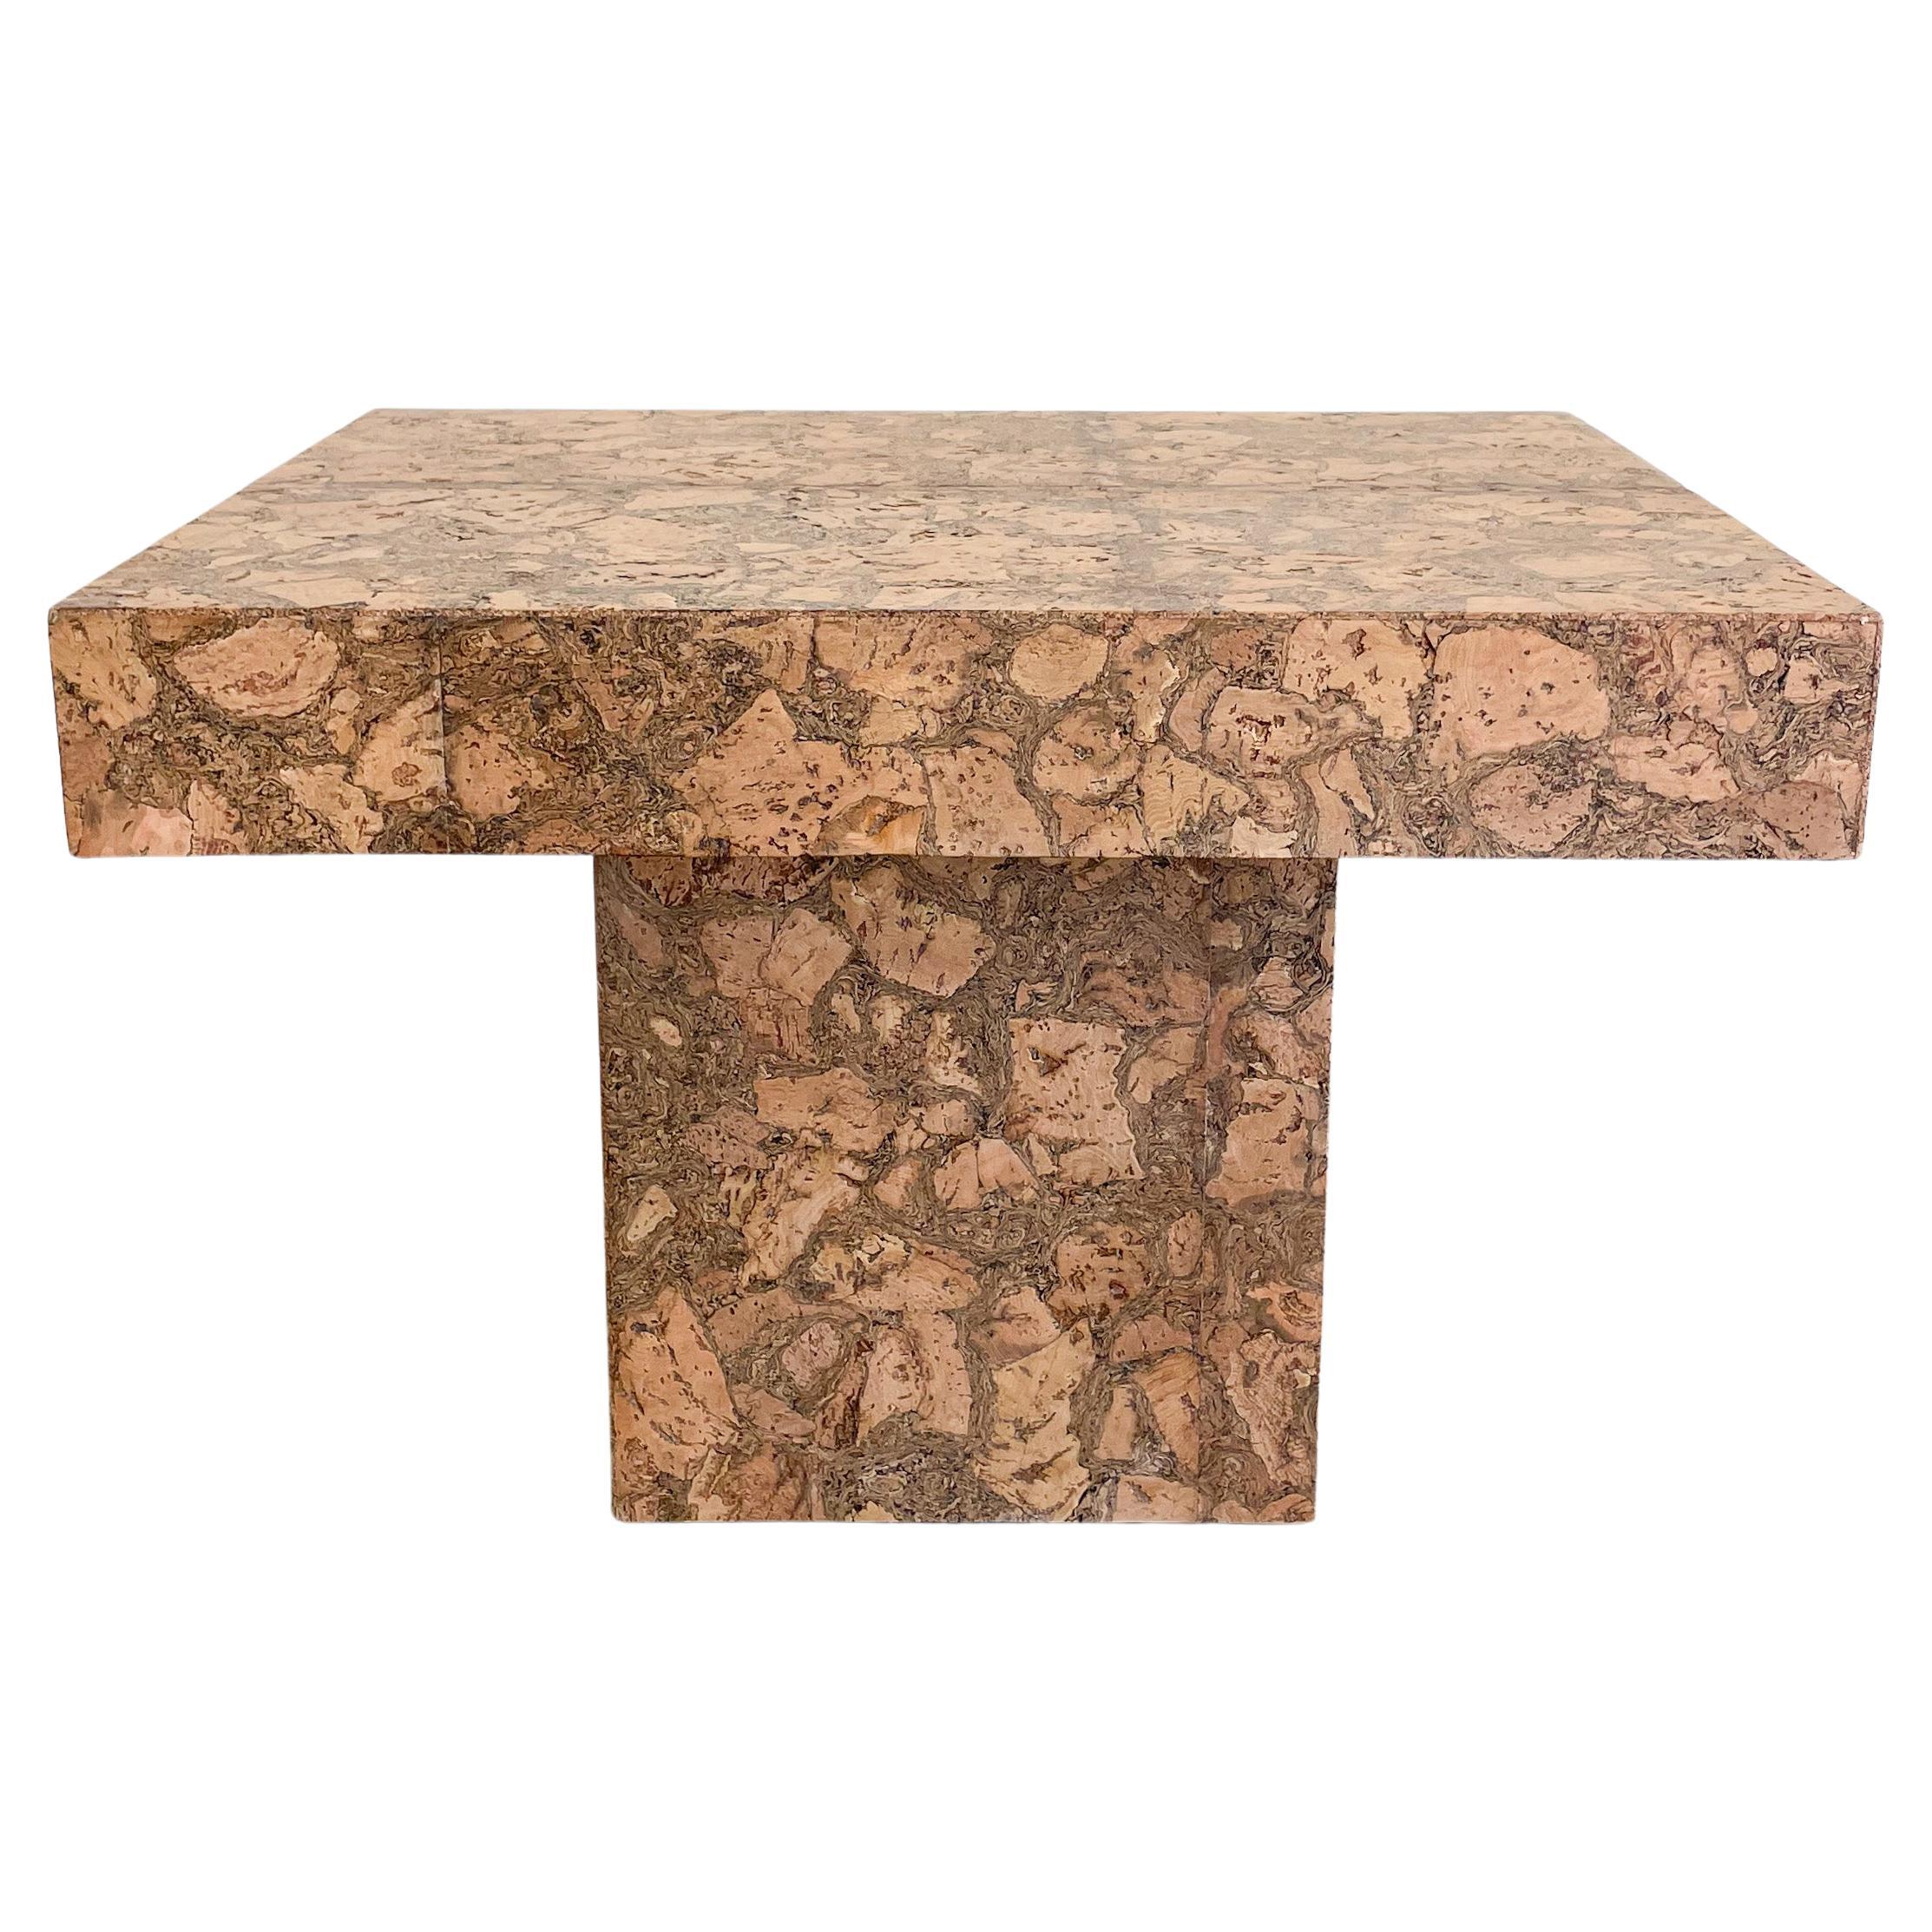 Vintage Cork Square End Table Side Table Cocktail Table 